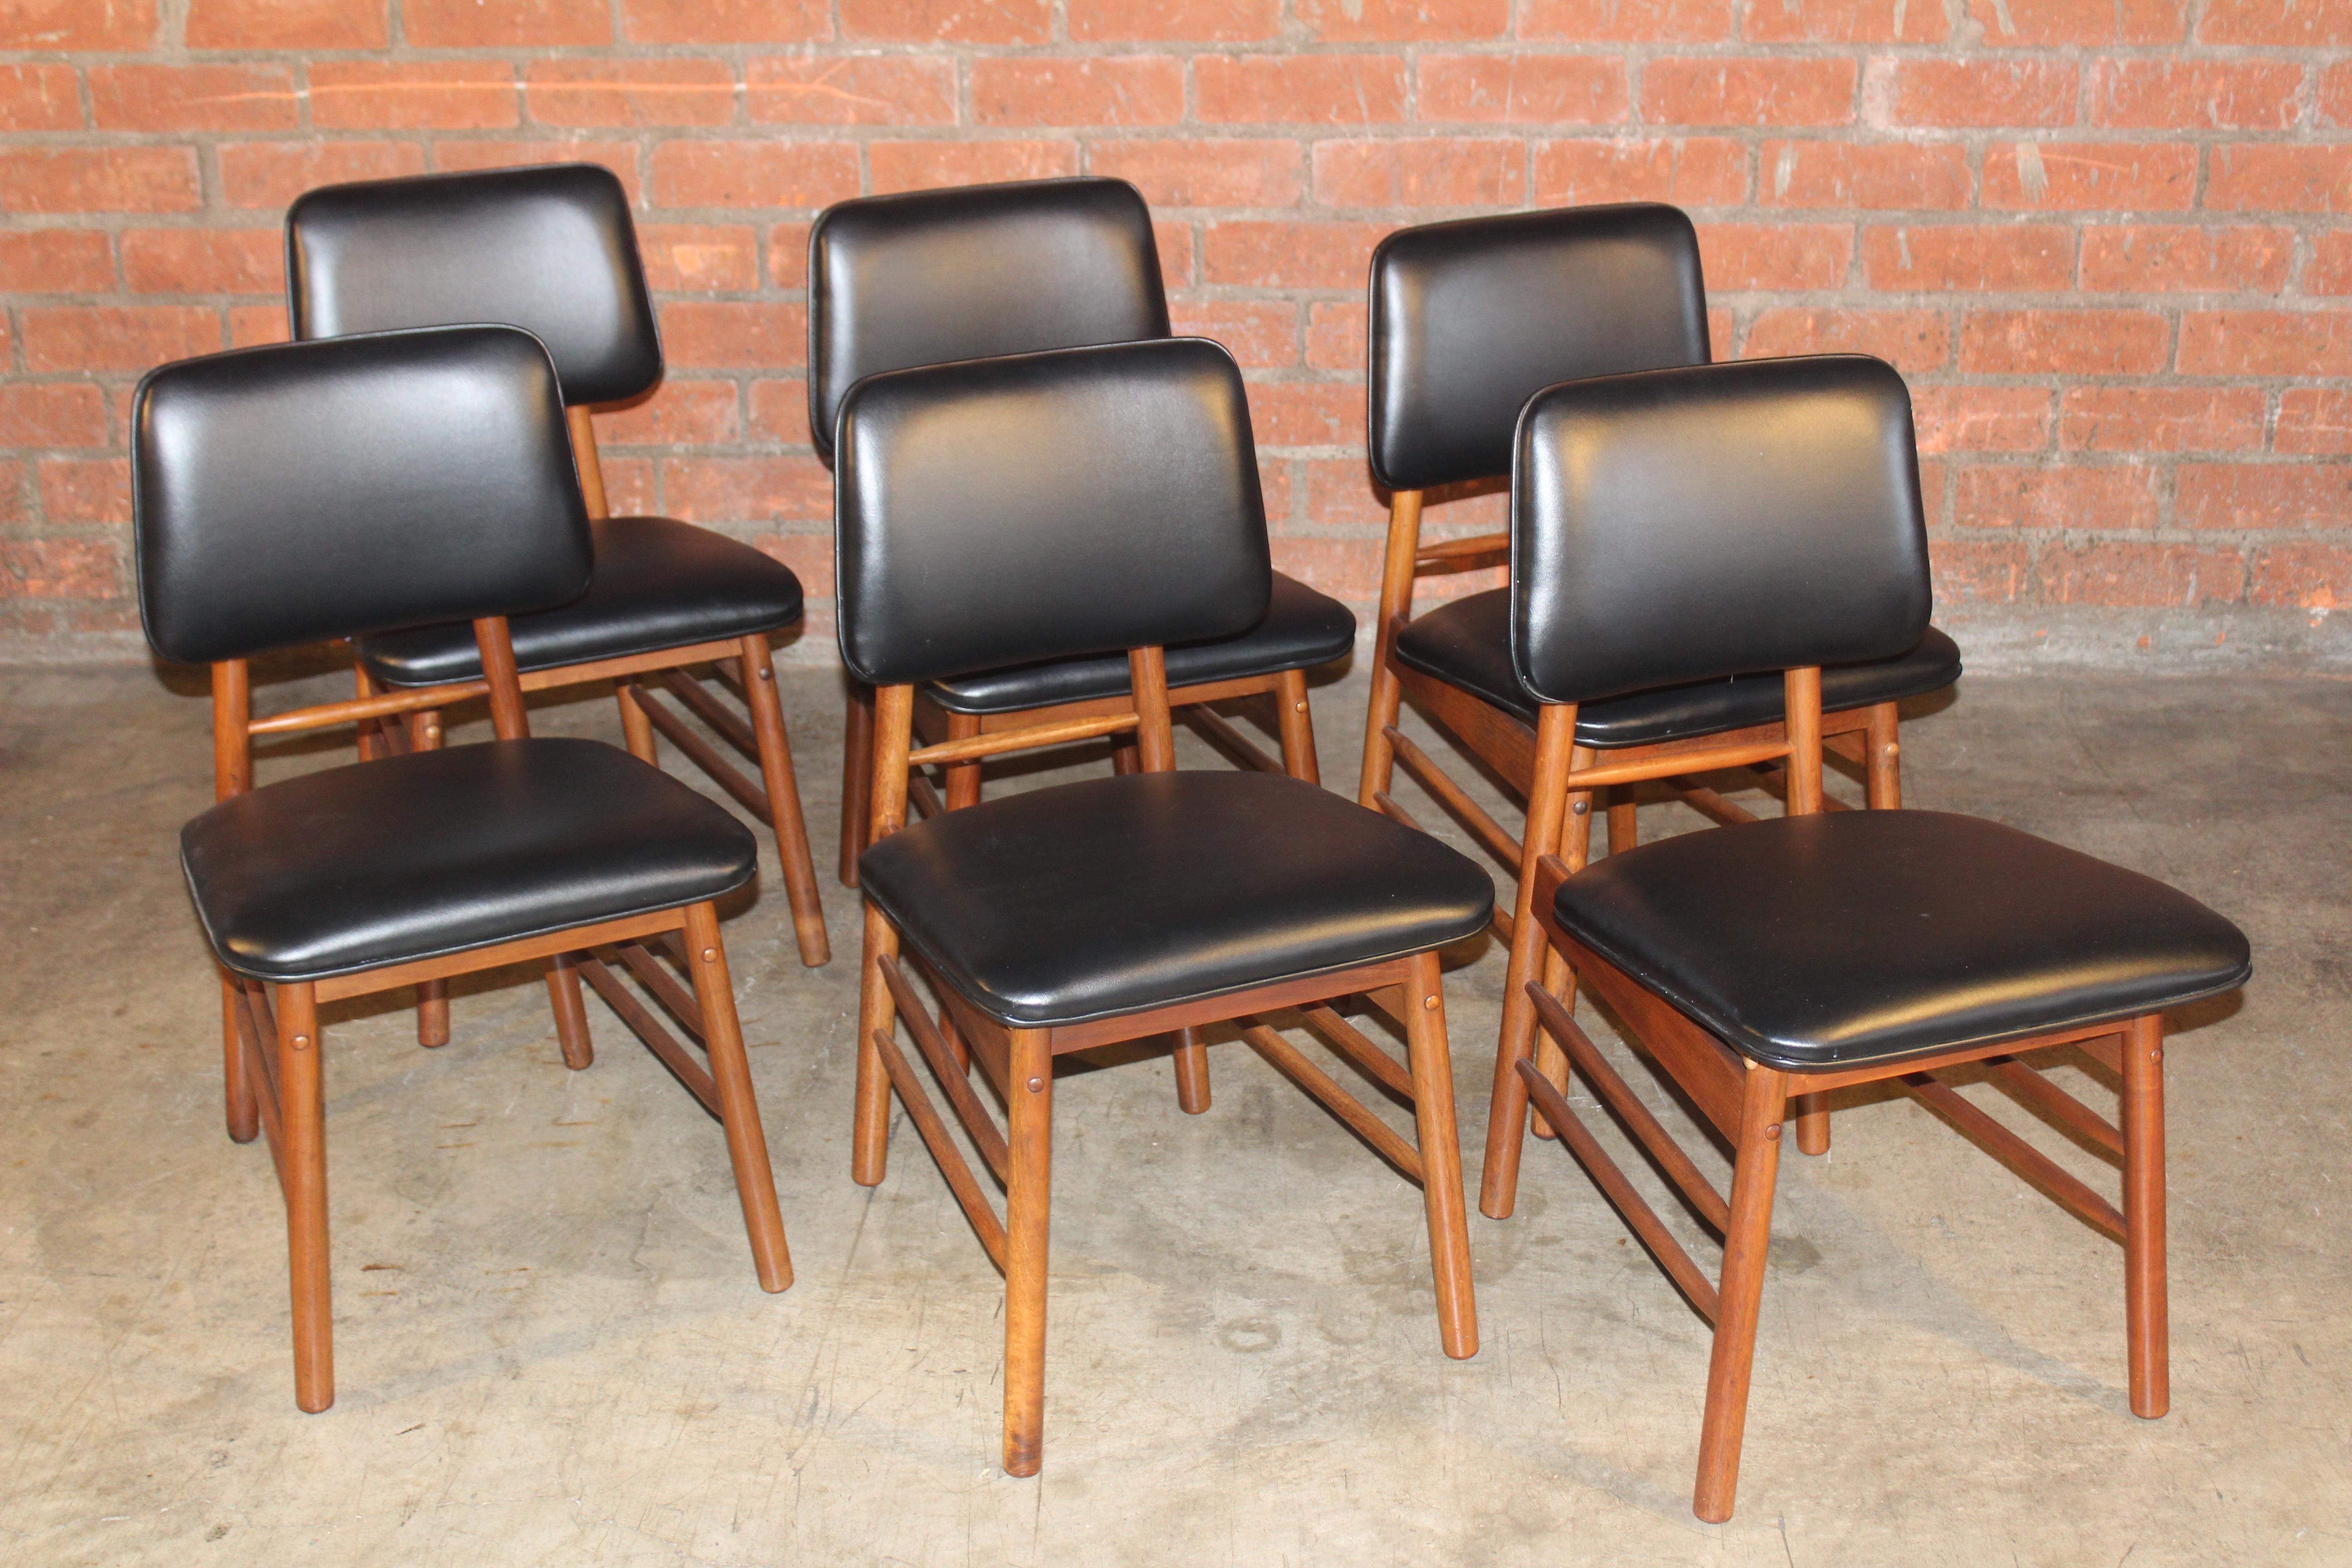 A set of six dining chairs designed by Greta Grossman, U.S.A, 1950s. Crafted in solid walnut with new upholstery in leatherette. Overall wonderful condition with minor signs of wear. One chair features one stretcher on the side compared to the other